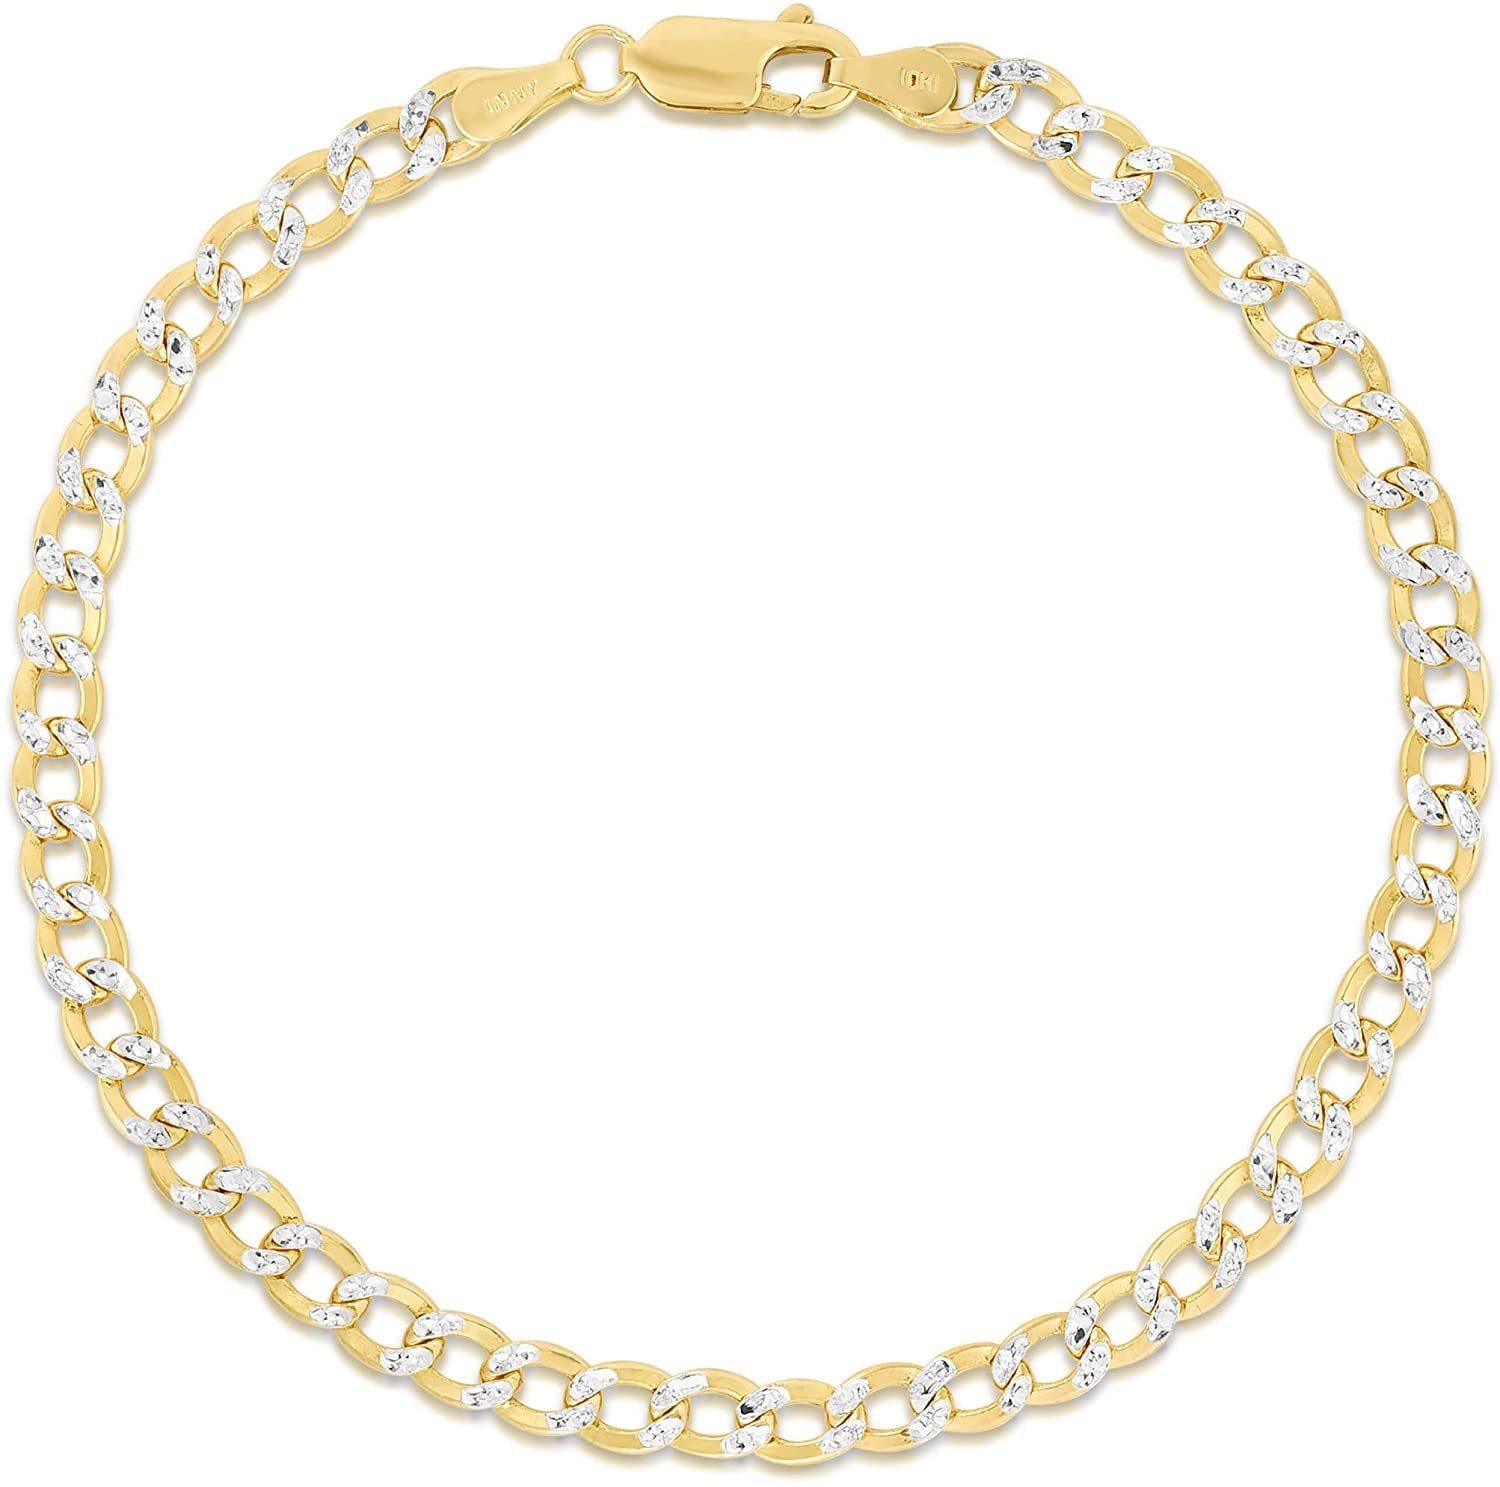 10k Yellow Gold 4.5mm Two Tone Lightweight White Pave Curb Bracelet and Anklet